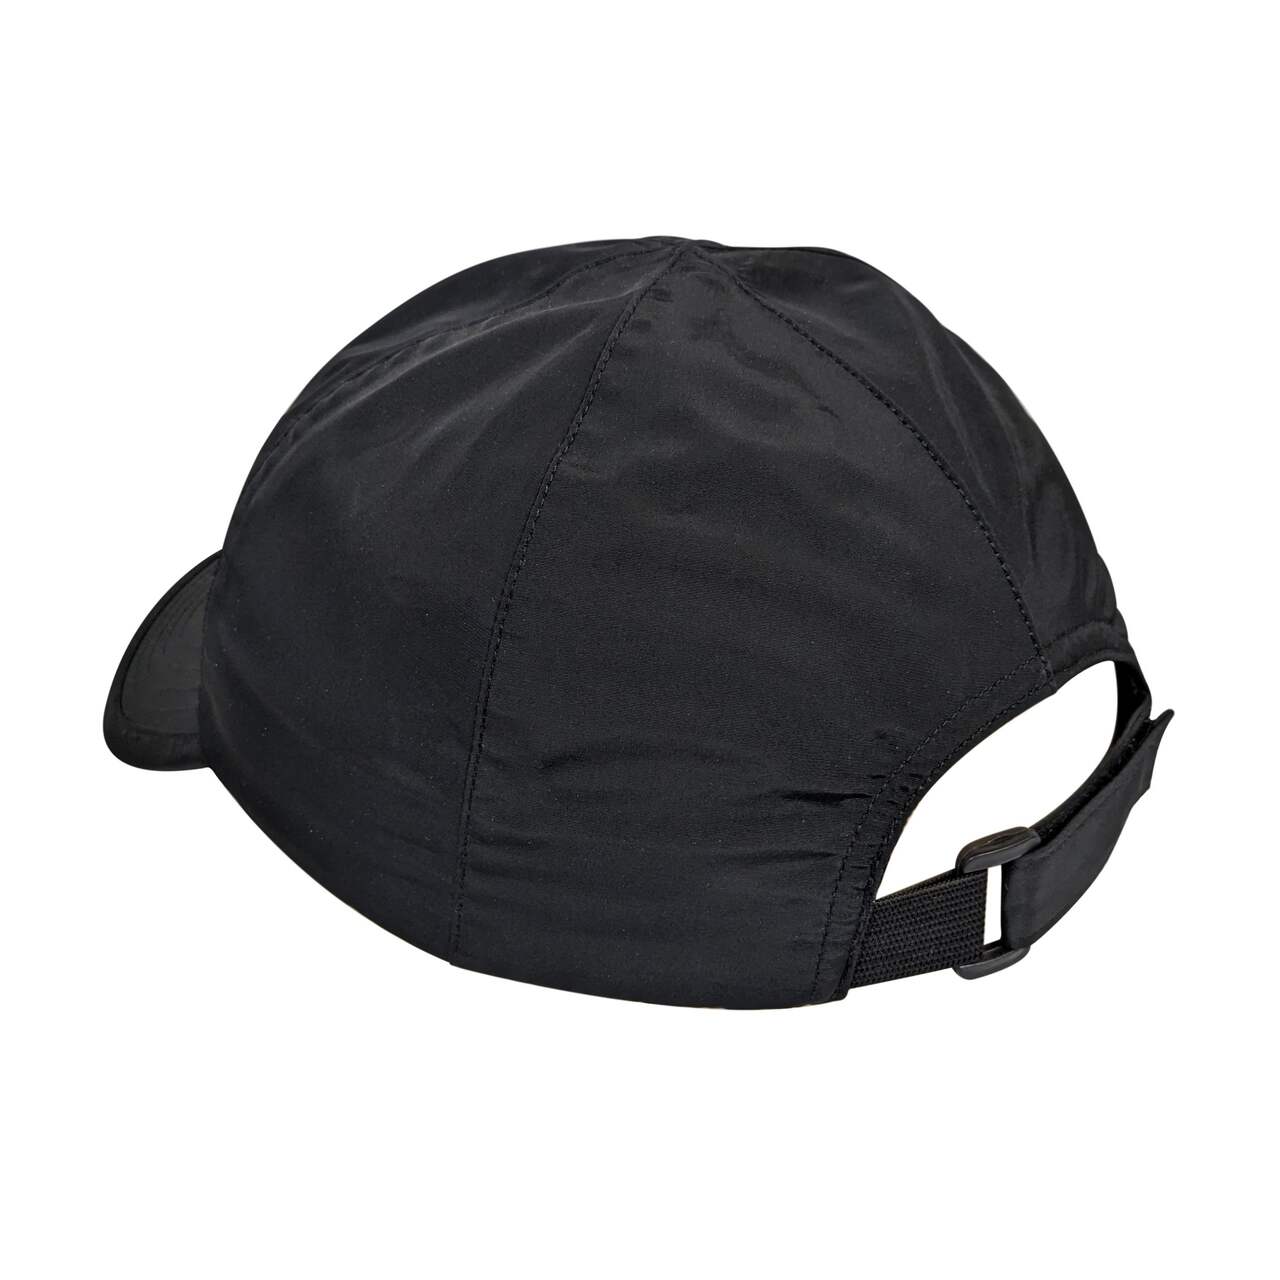 Outbound Water Repellent Adjustable Cap, Black, One-Size